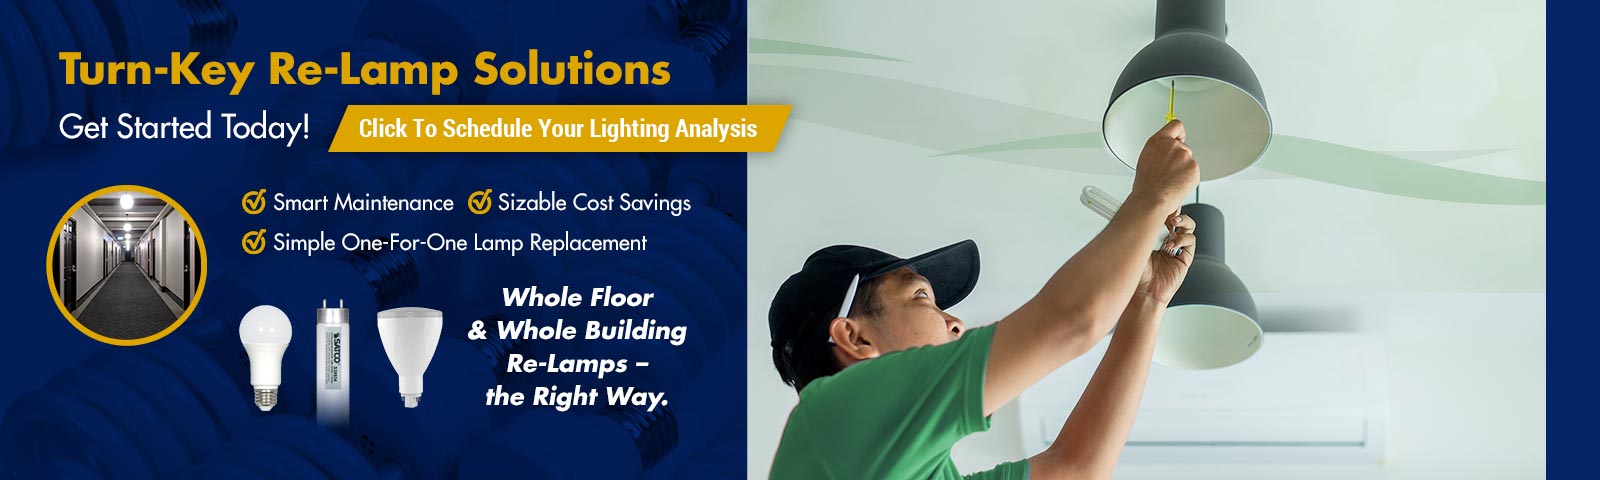 Turn-key Re-lamp solutions from Bay Lighting